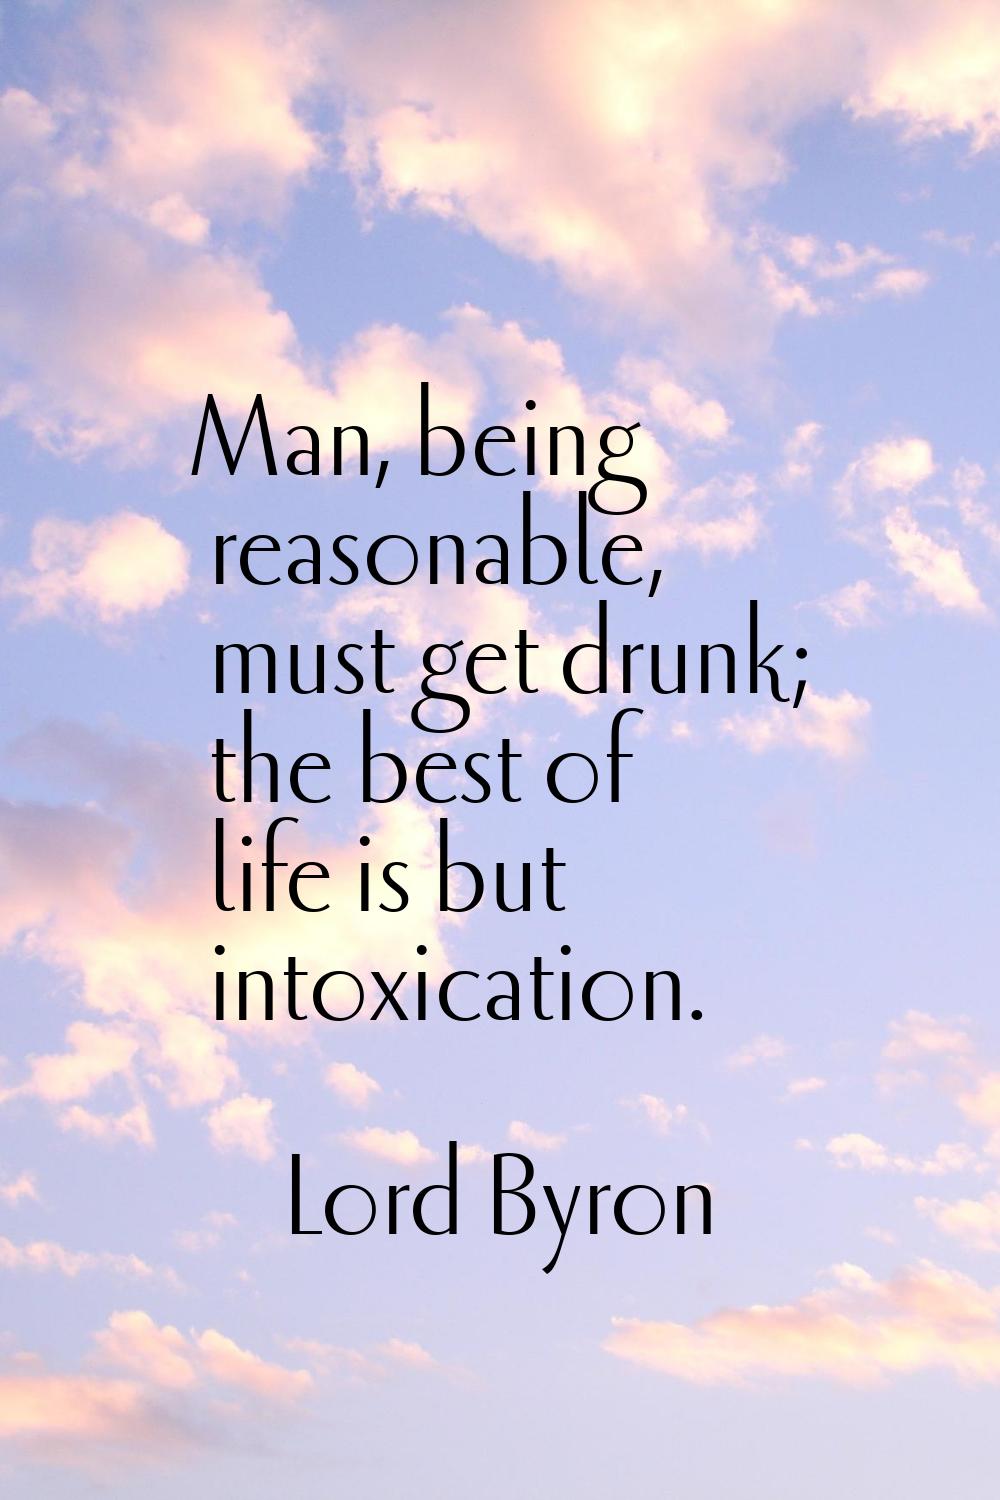 Man, being reasonable, must get drunk; the best of life is but intoxication.